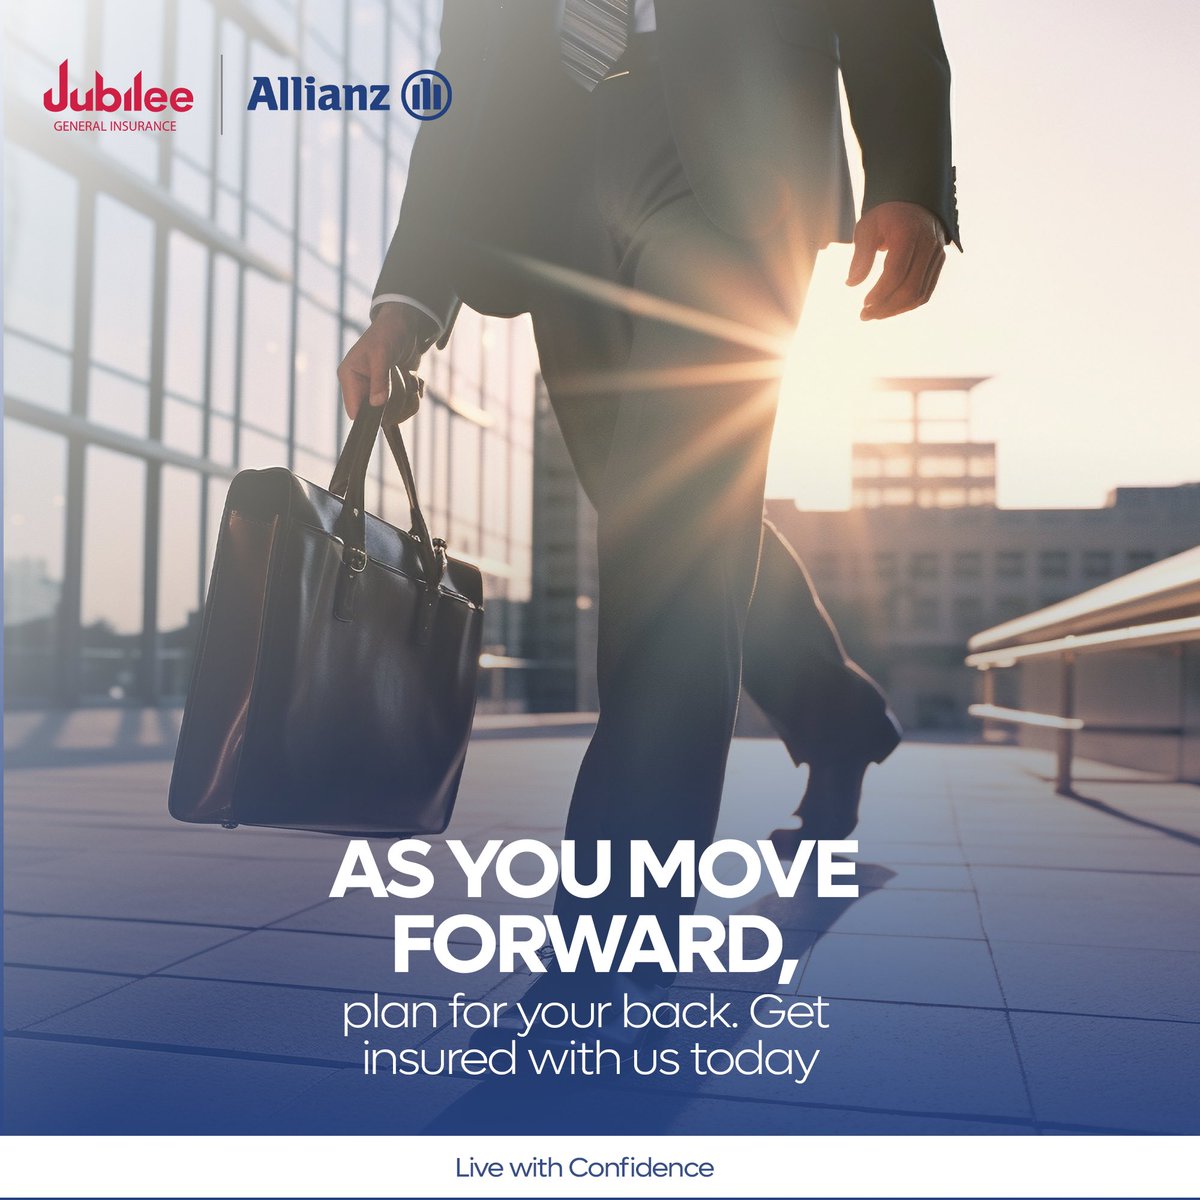 Log in to our sales portal and buy; a Motor insurance, Travel insurance, Traders comprehensive insurance policy , Marine cargo insurance, Personal accident insurance and Professional indemnity.
Simply log in to sales.jubileeallianz.co.ug and follow the prompts.

#selfservice